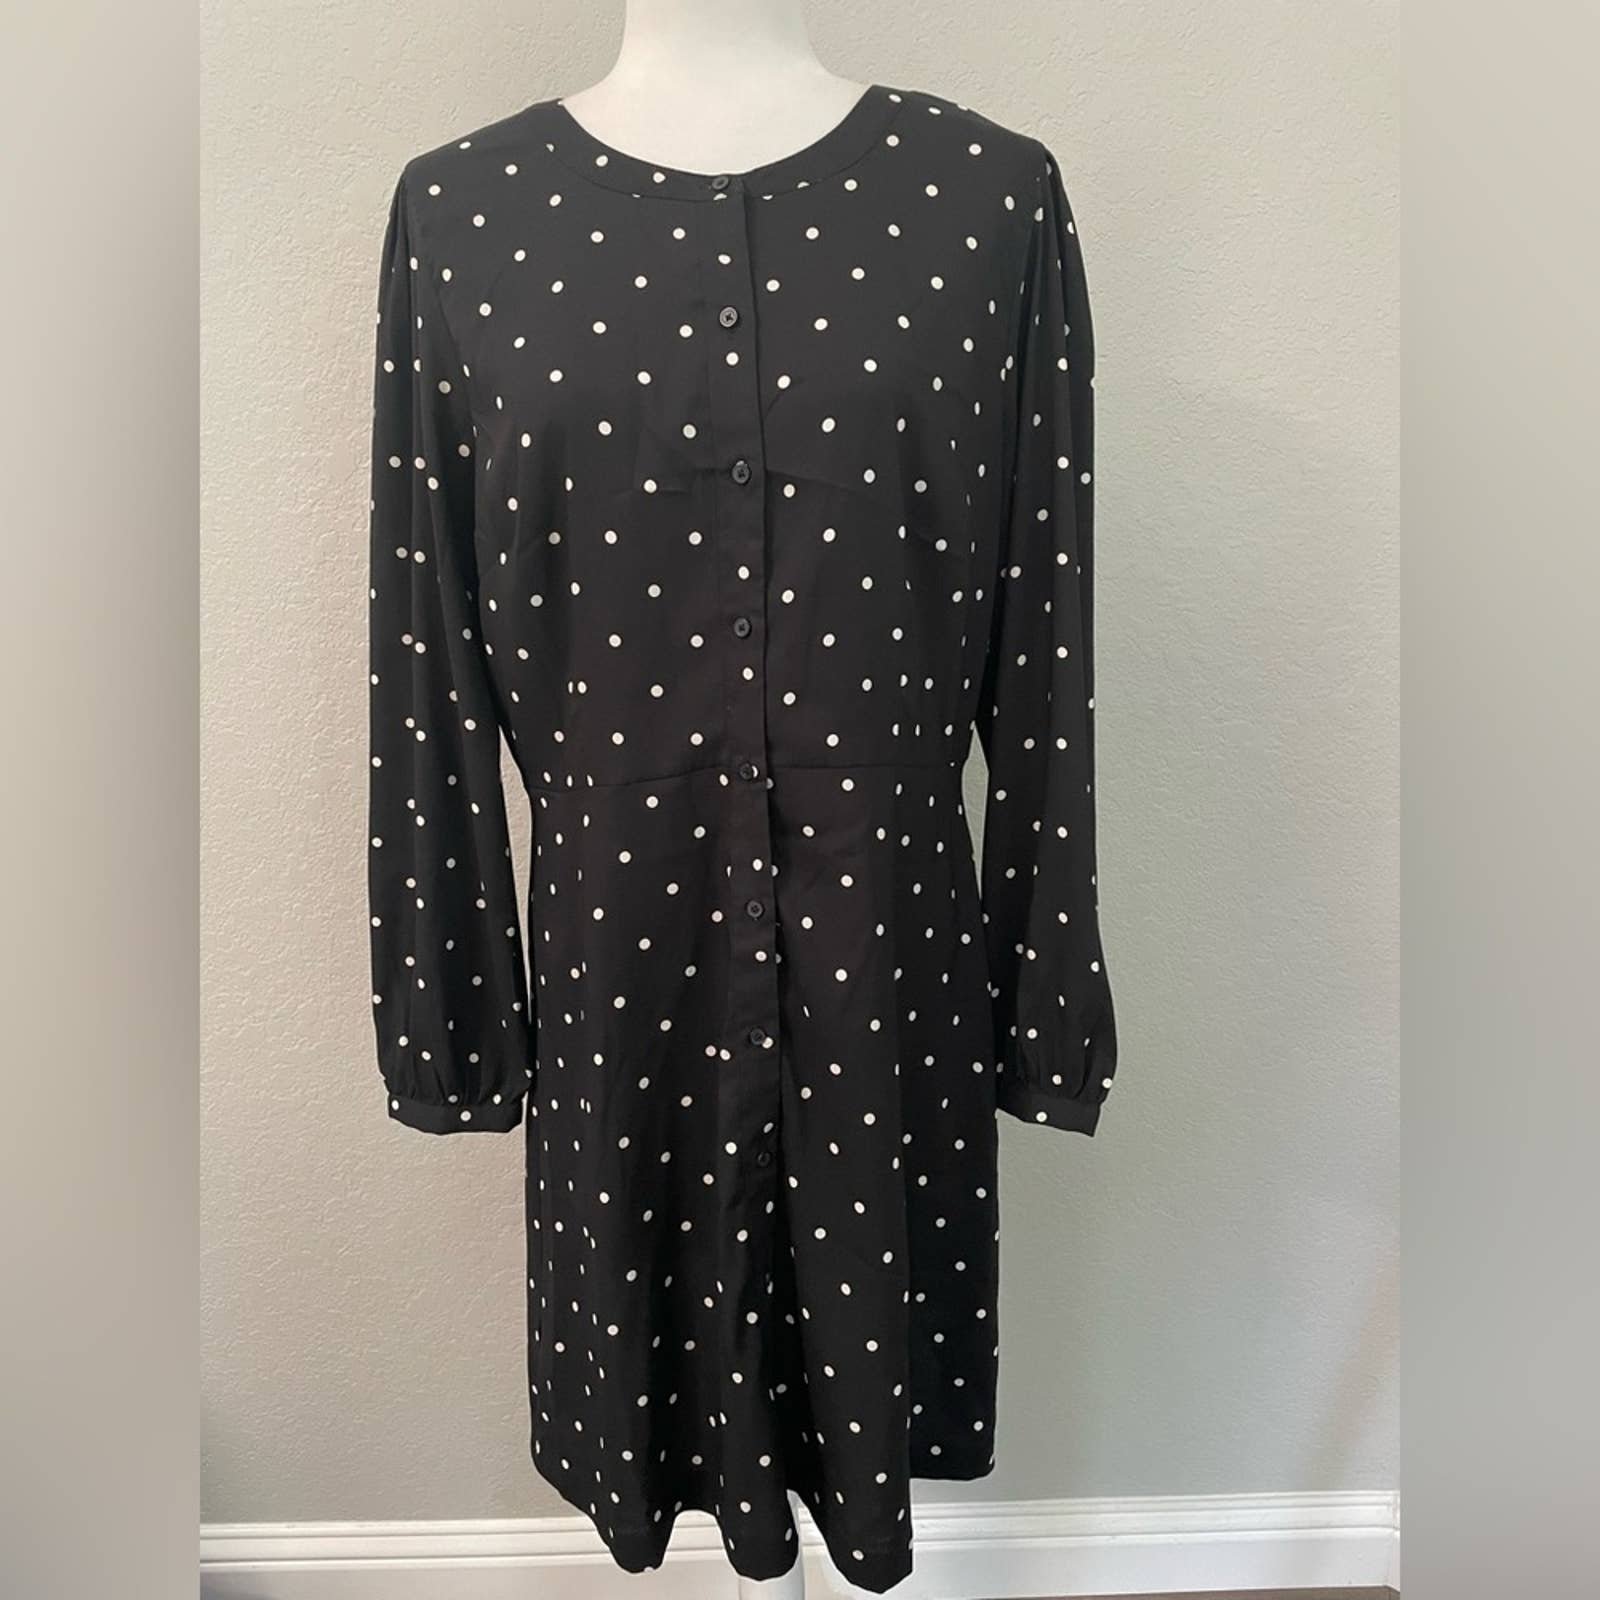 Loft Black with white polka dotted button down dress- size 12 4tRcE6yFz